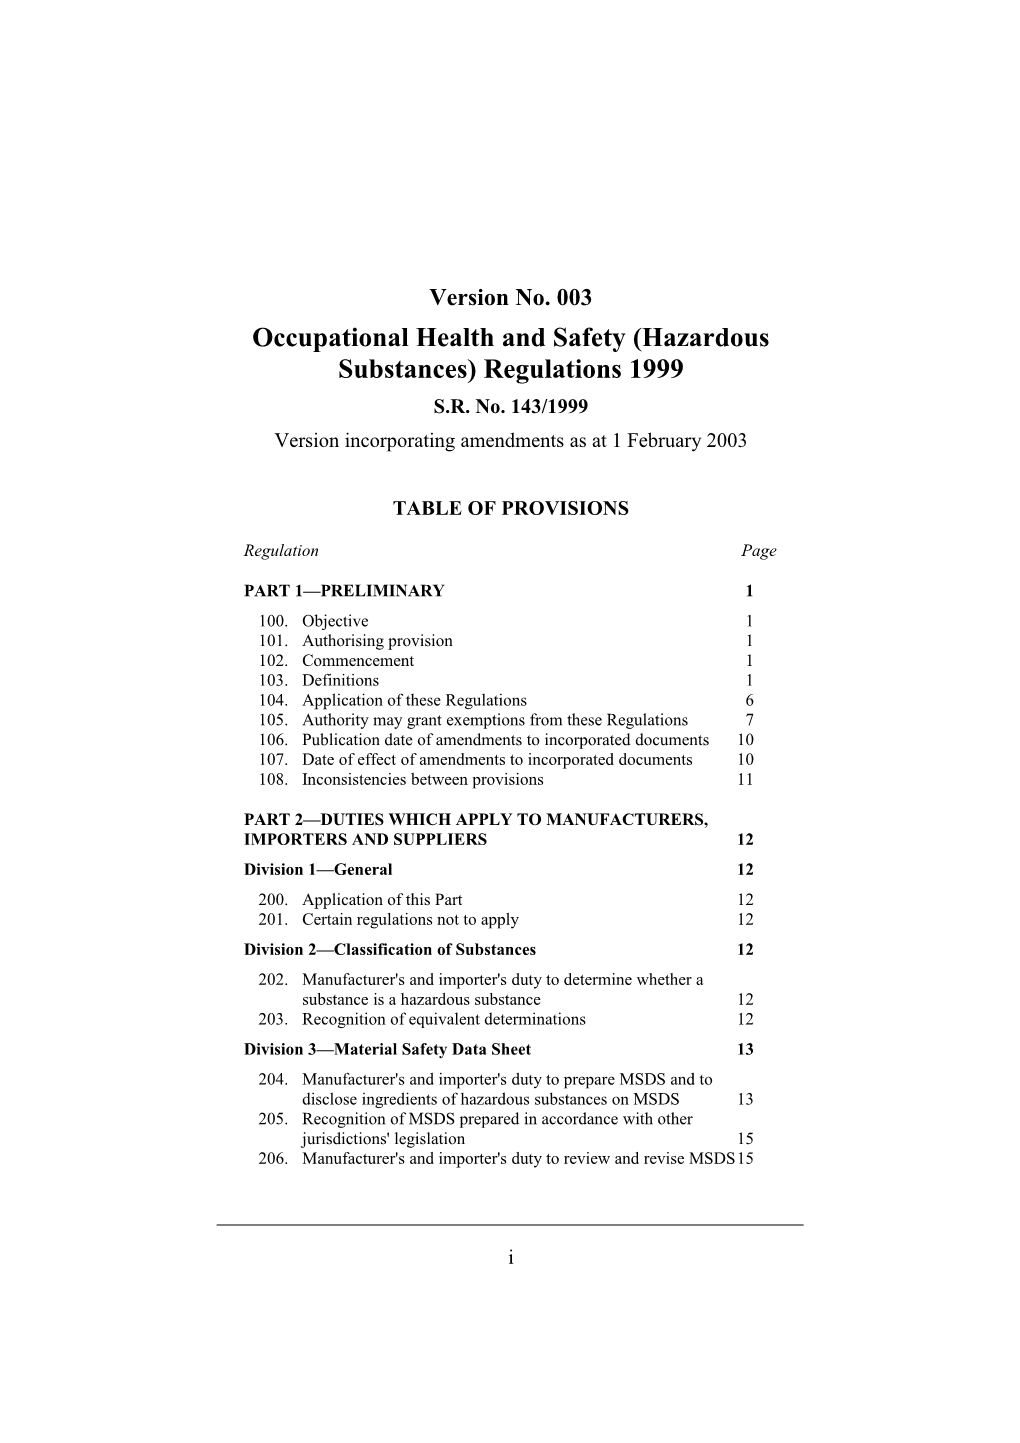 Occupational Health and Safety (Hazardous Substances) Regulations 1999